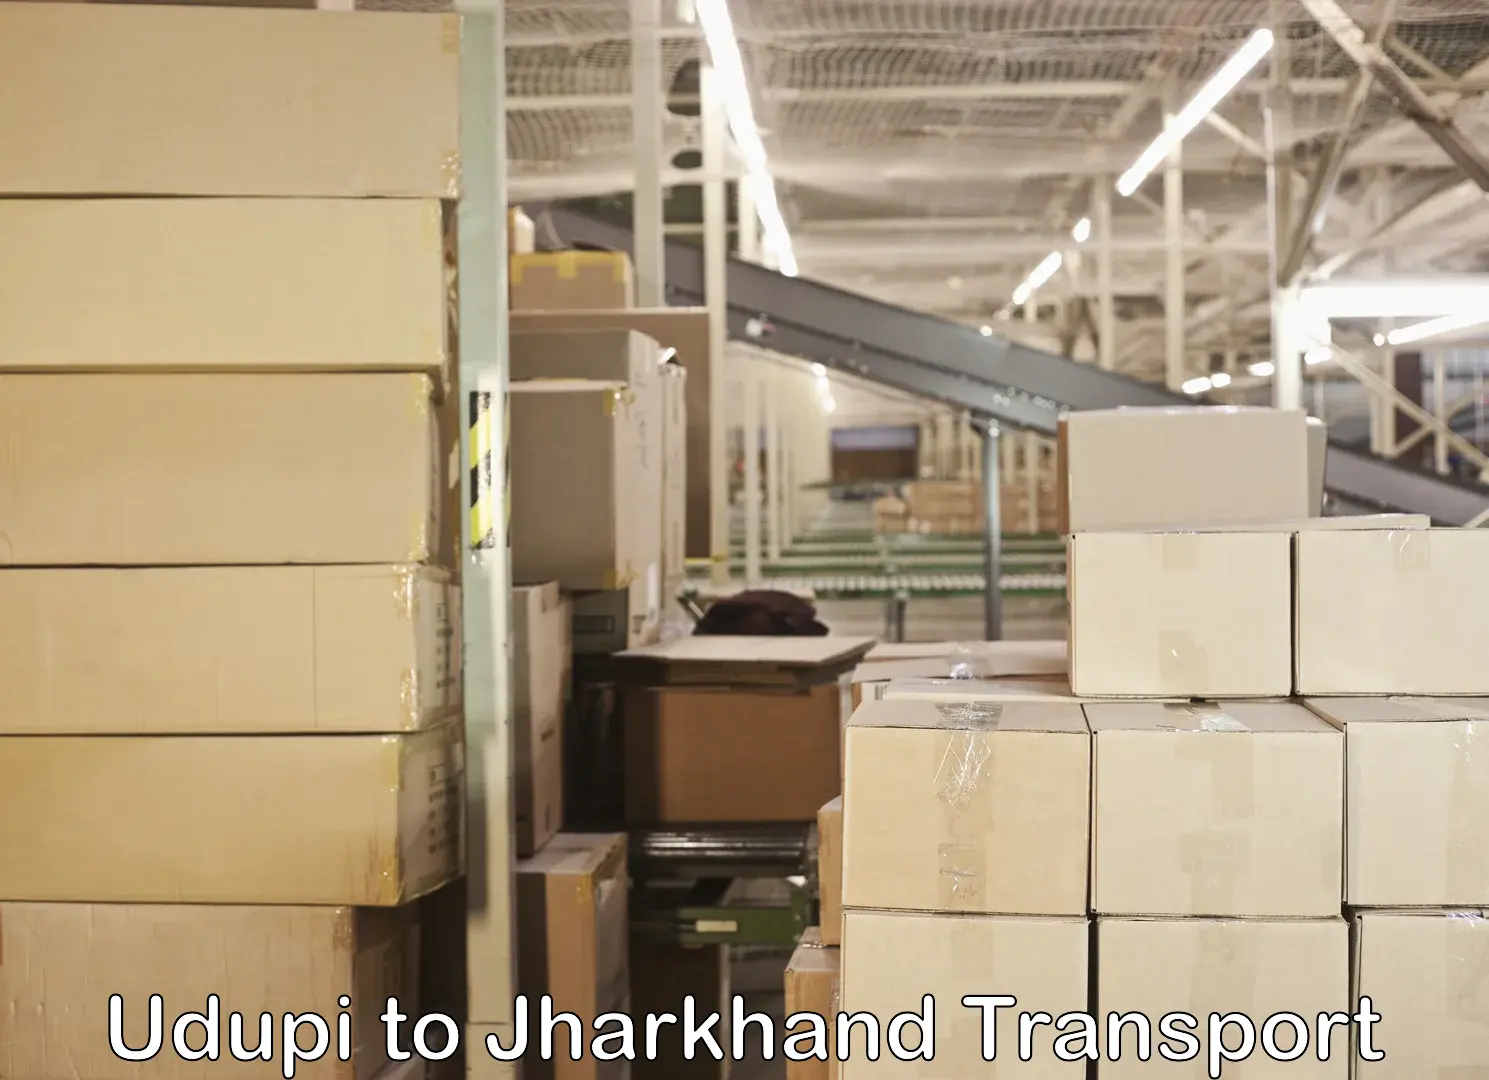 Truck transport companies in India Udupi to Jharkhand